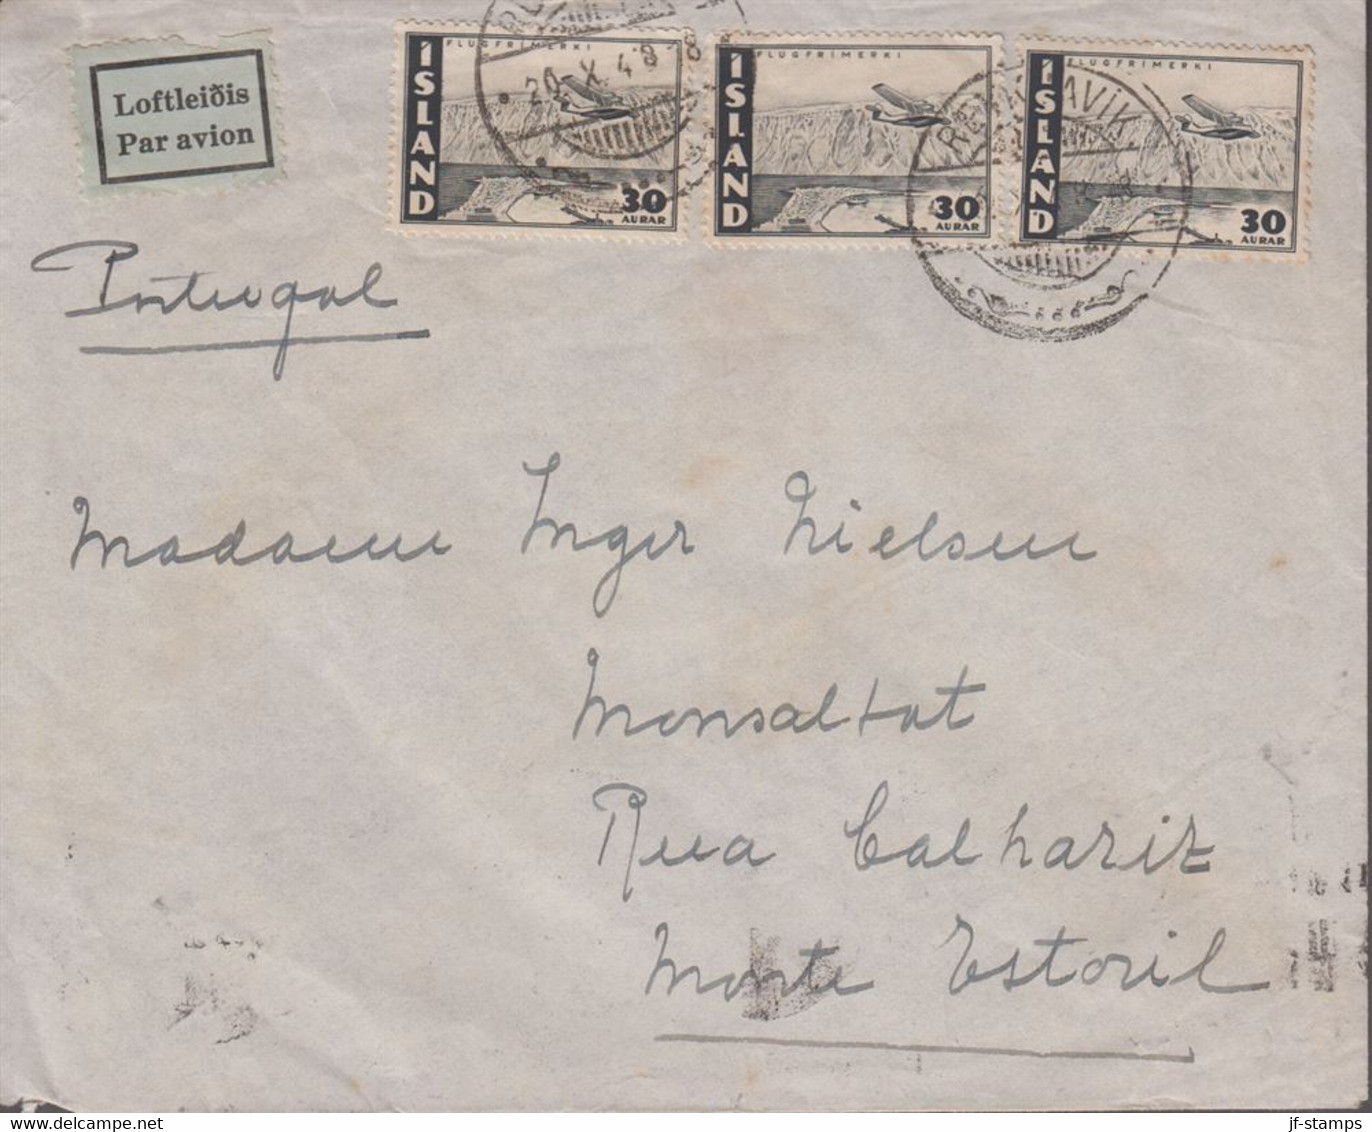 1948. ISLAND. . Air Mail. 3 Ex 30 Aur Pair On Cover From REYKJAVIK 20 X 1948 To Portu... (Michel 242) - JF419126 - Storia Postale